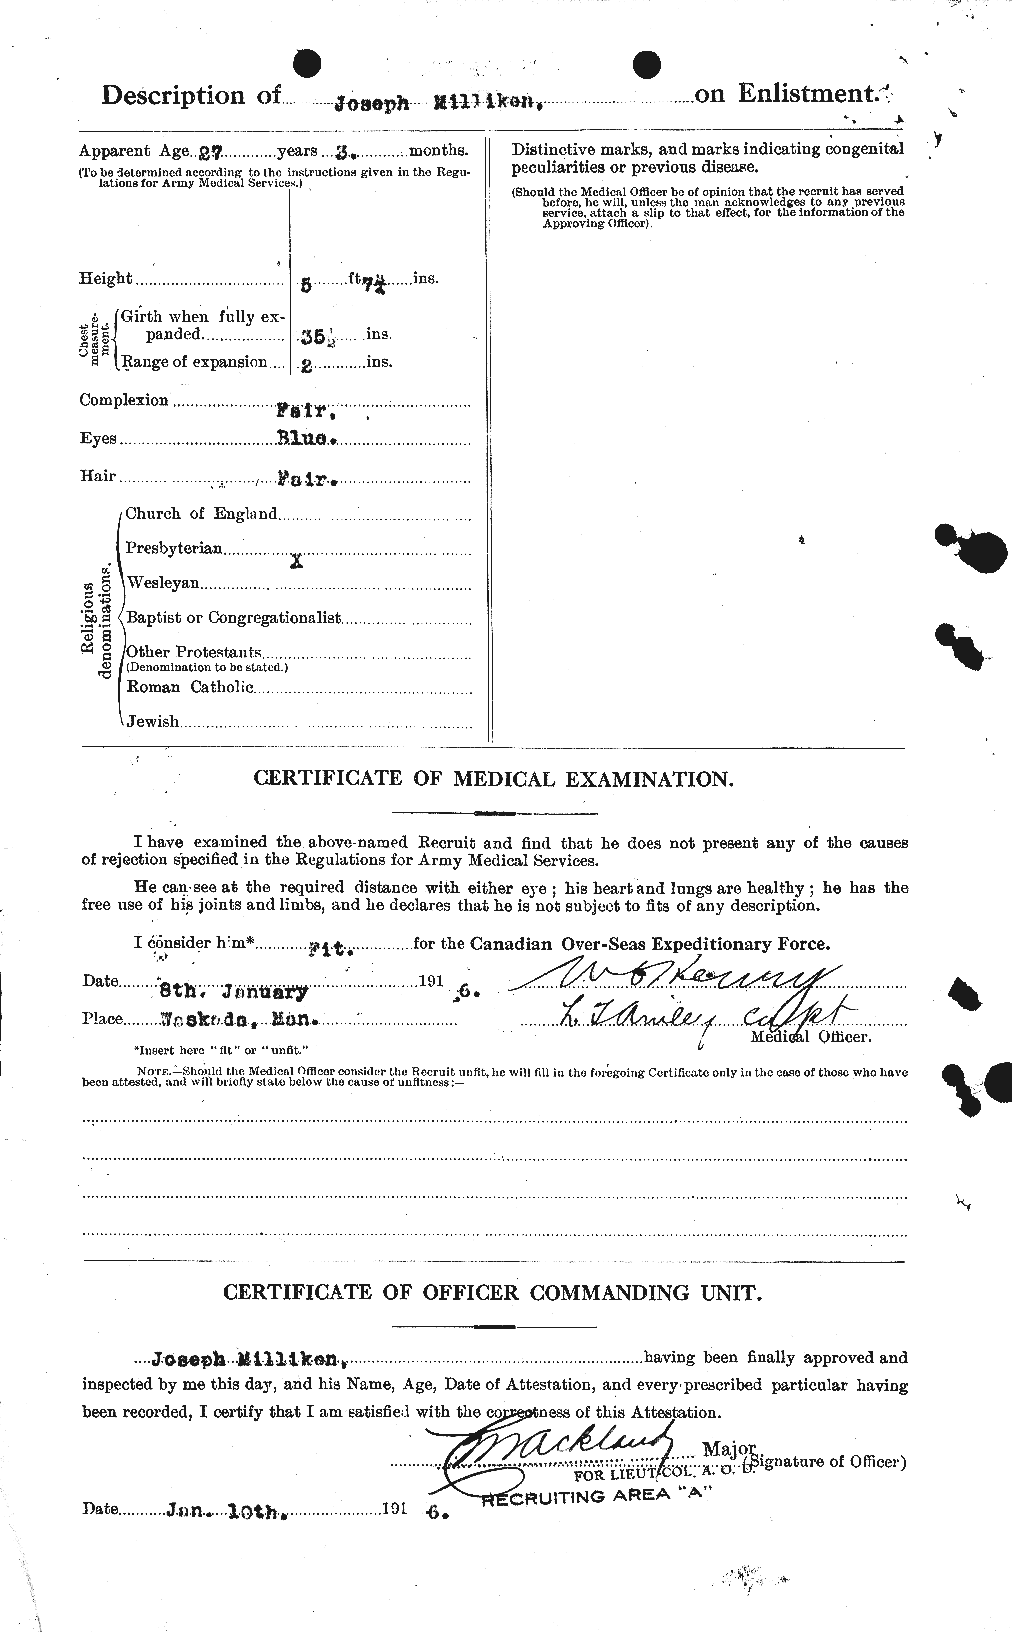 Personnel Records of the First World War - CEF 496372b